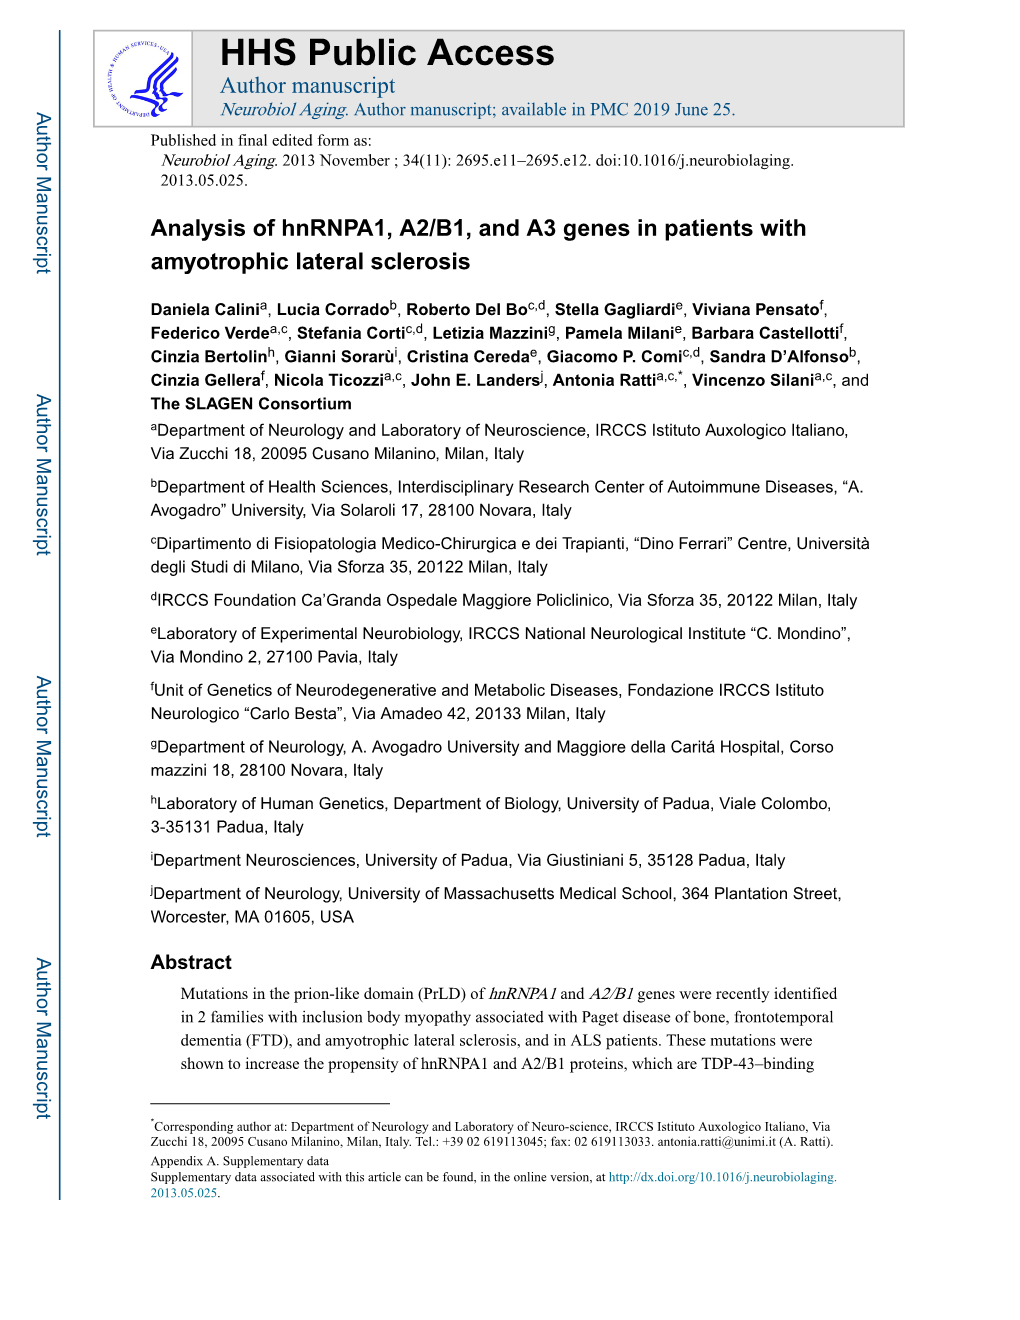 Analysis of Hnrnpa1, A2/B1, and A3 Genes in Patients with Amyotrophic Lateral Sclerosis